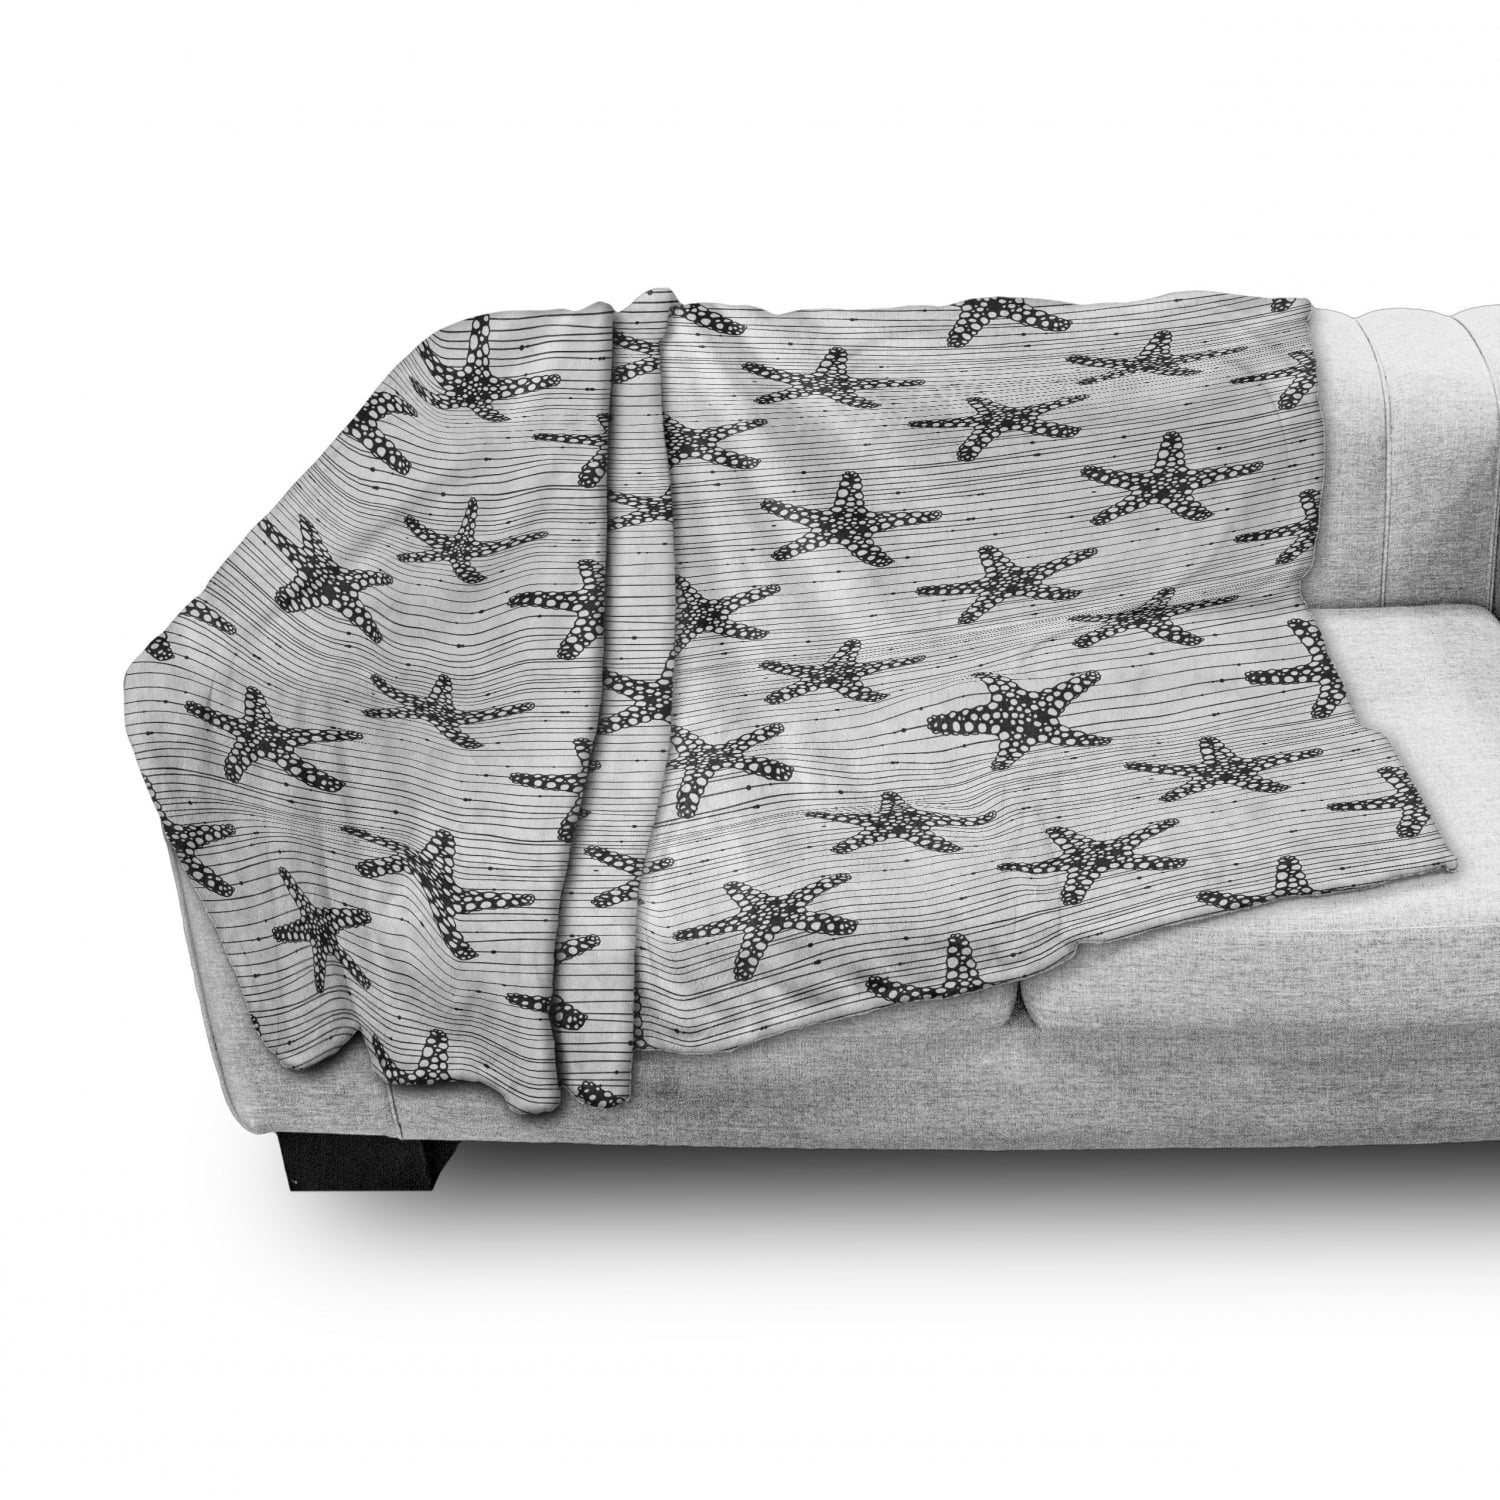 Starfish Pattern on Uneven Stripes with Dots Monochromatic Image Ambesonne Nautical Soft Flannel Fleece Throw Blanket Cozy Plush for Indoor and Outdoor Use 60 x 80 Charcoal Grey and White